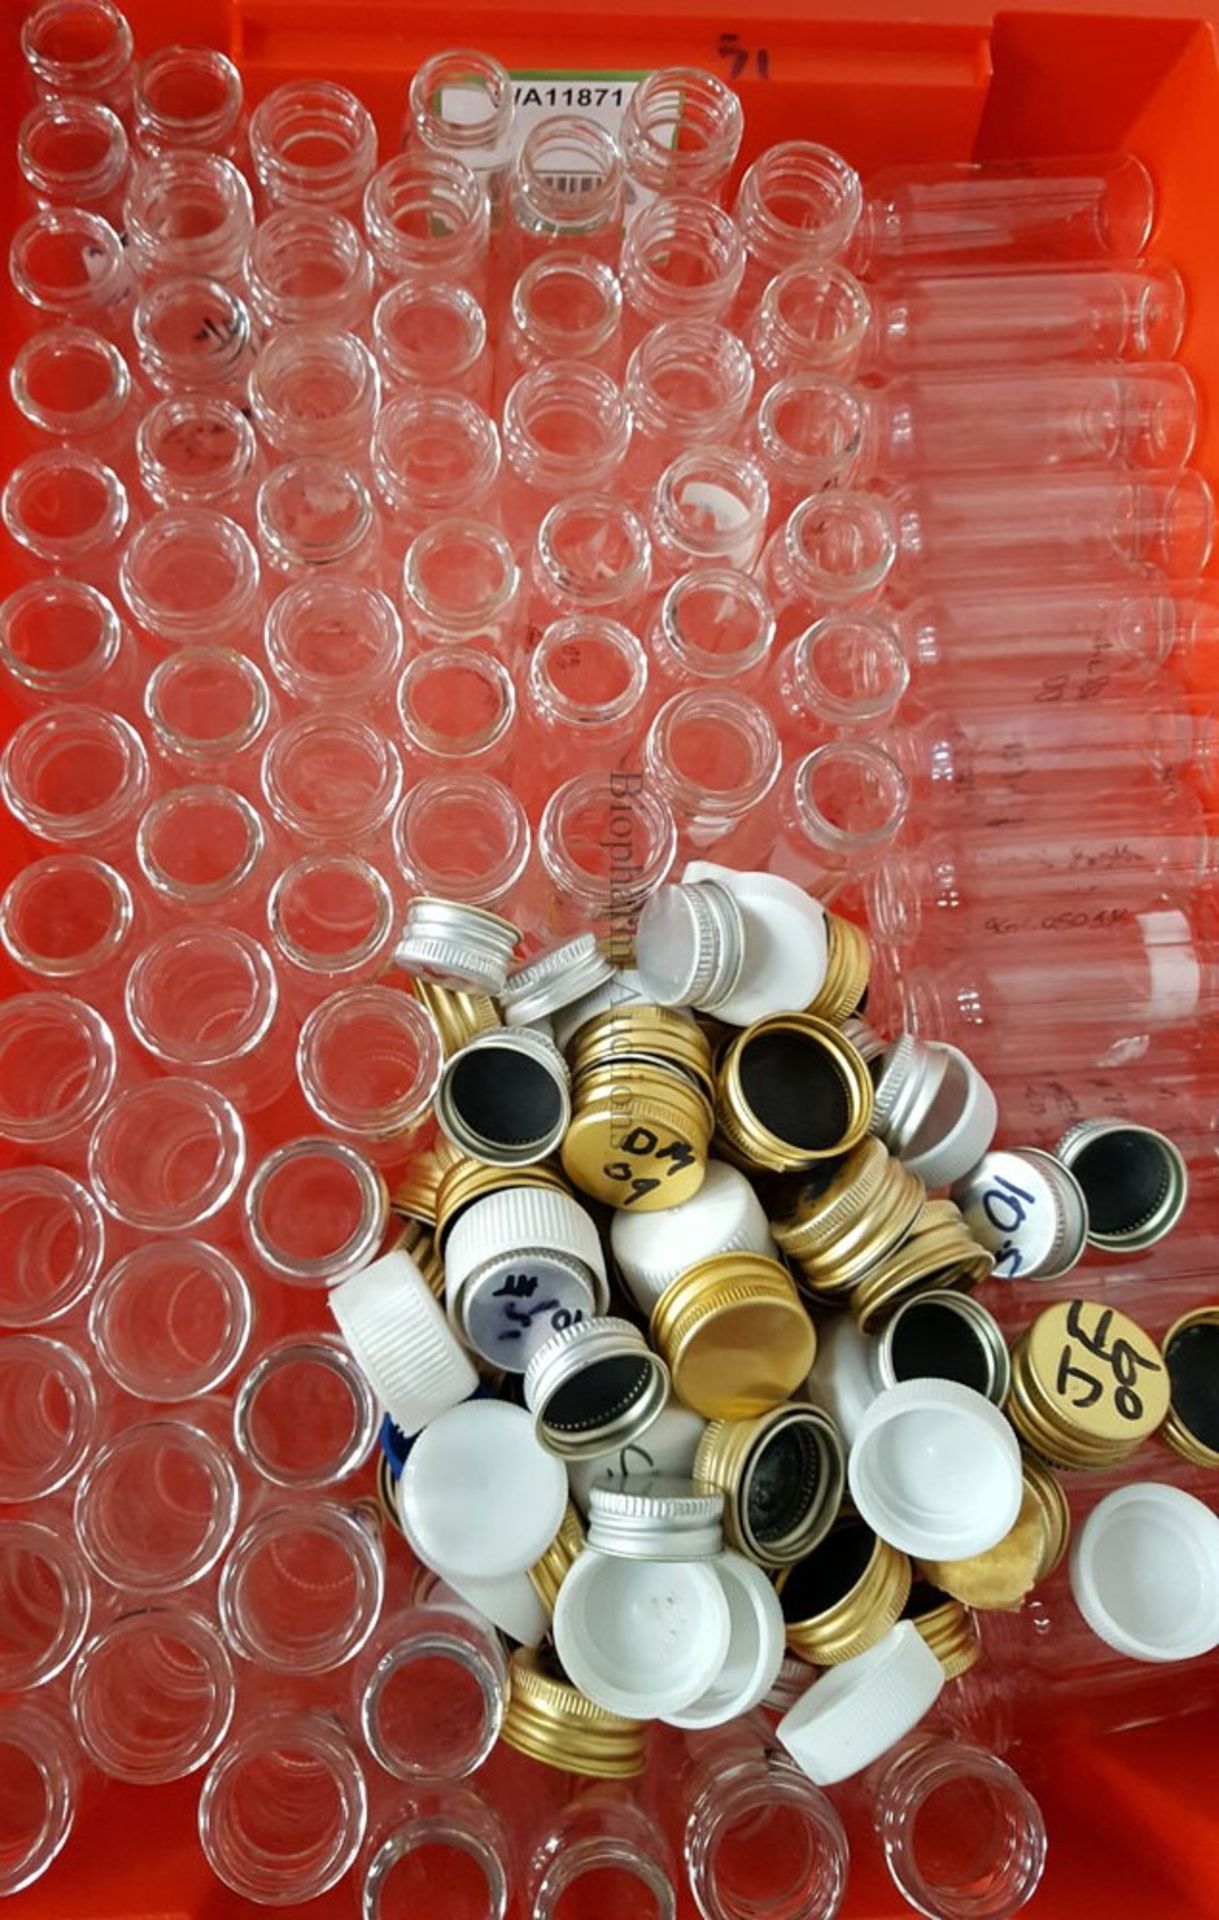 Quantity of glass screw top bottles and caps (Ref: WA11871)